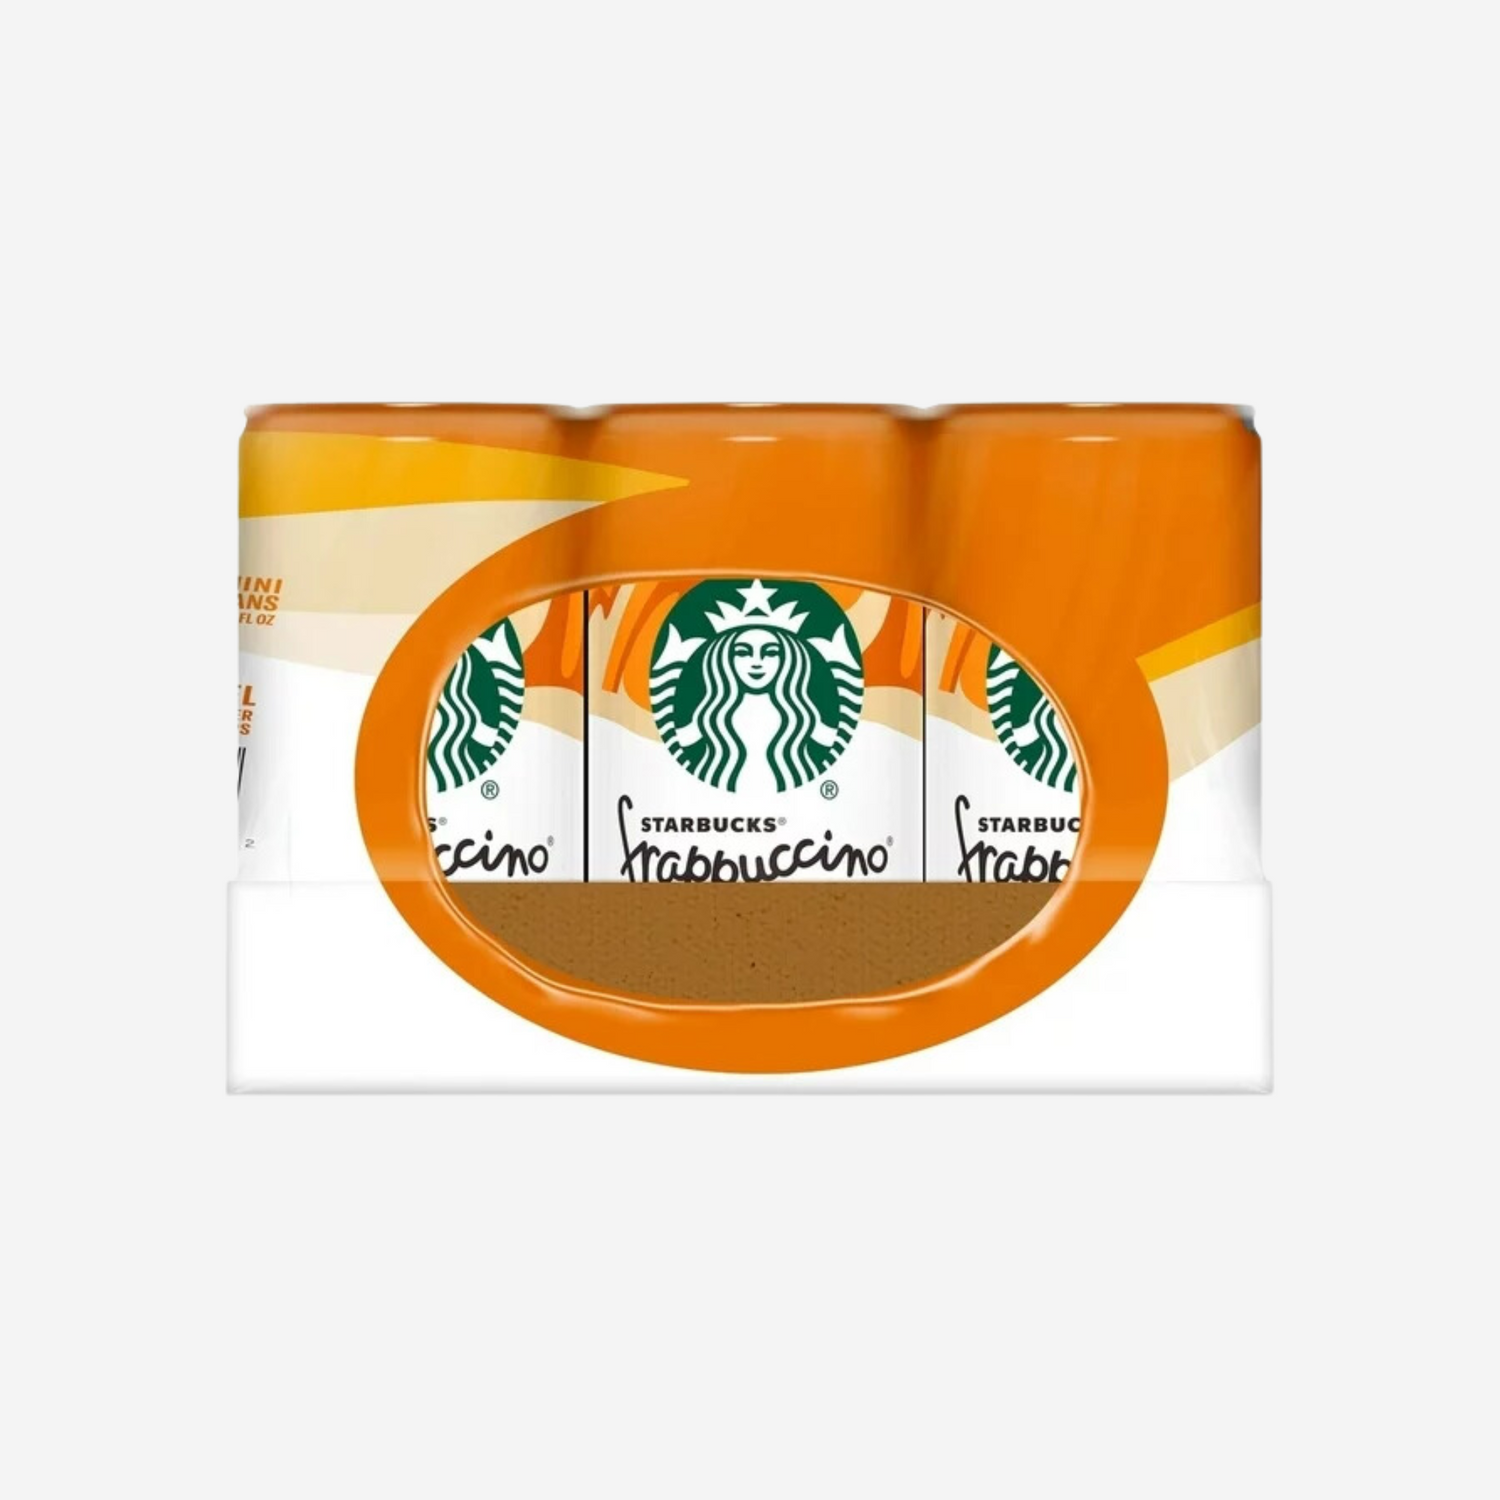 Starbucks Frappuccino Caramel Mini Coffee Drink, 6.5 Fluid Ounce (Pack of 12)